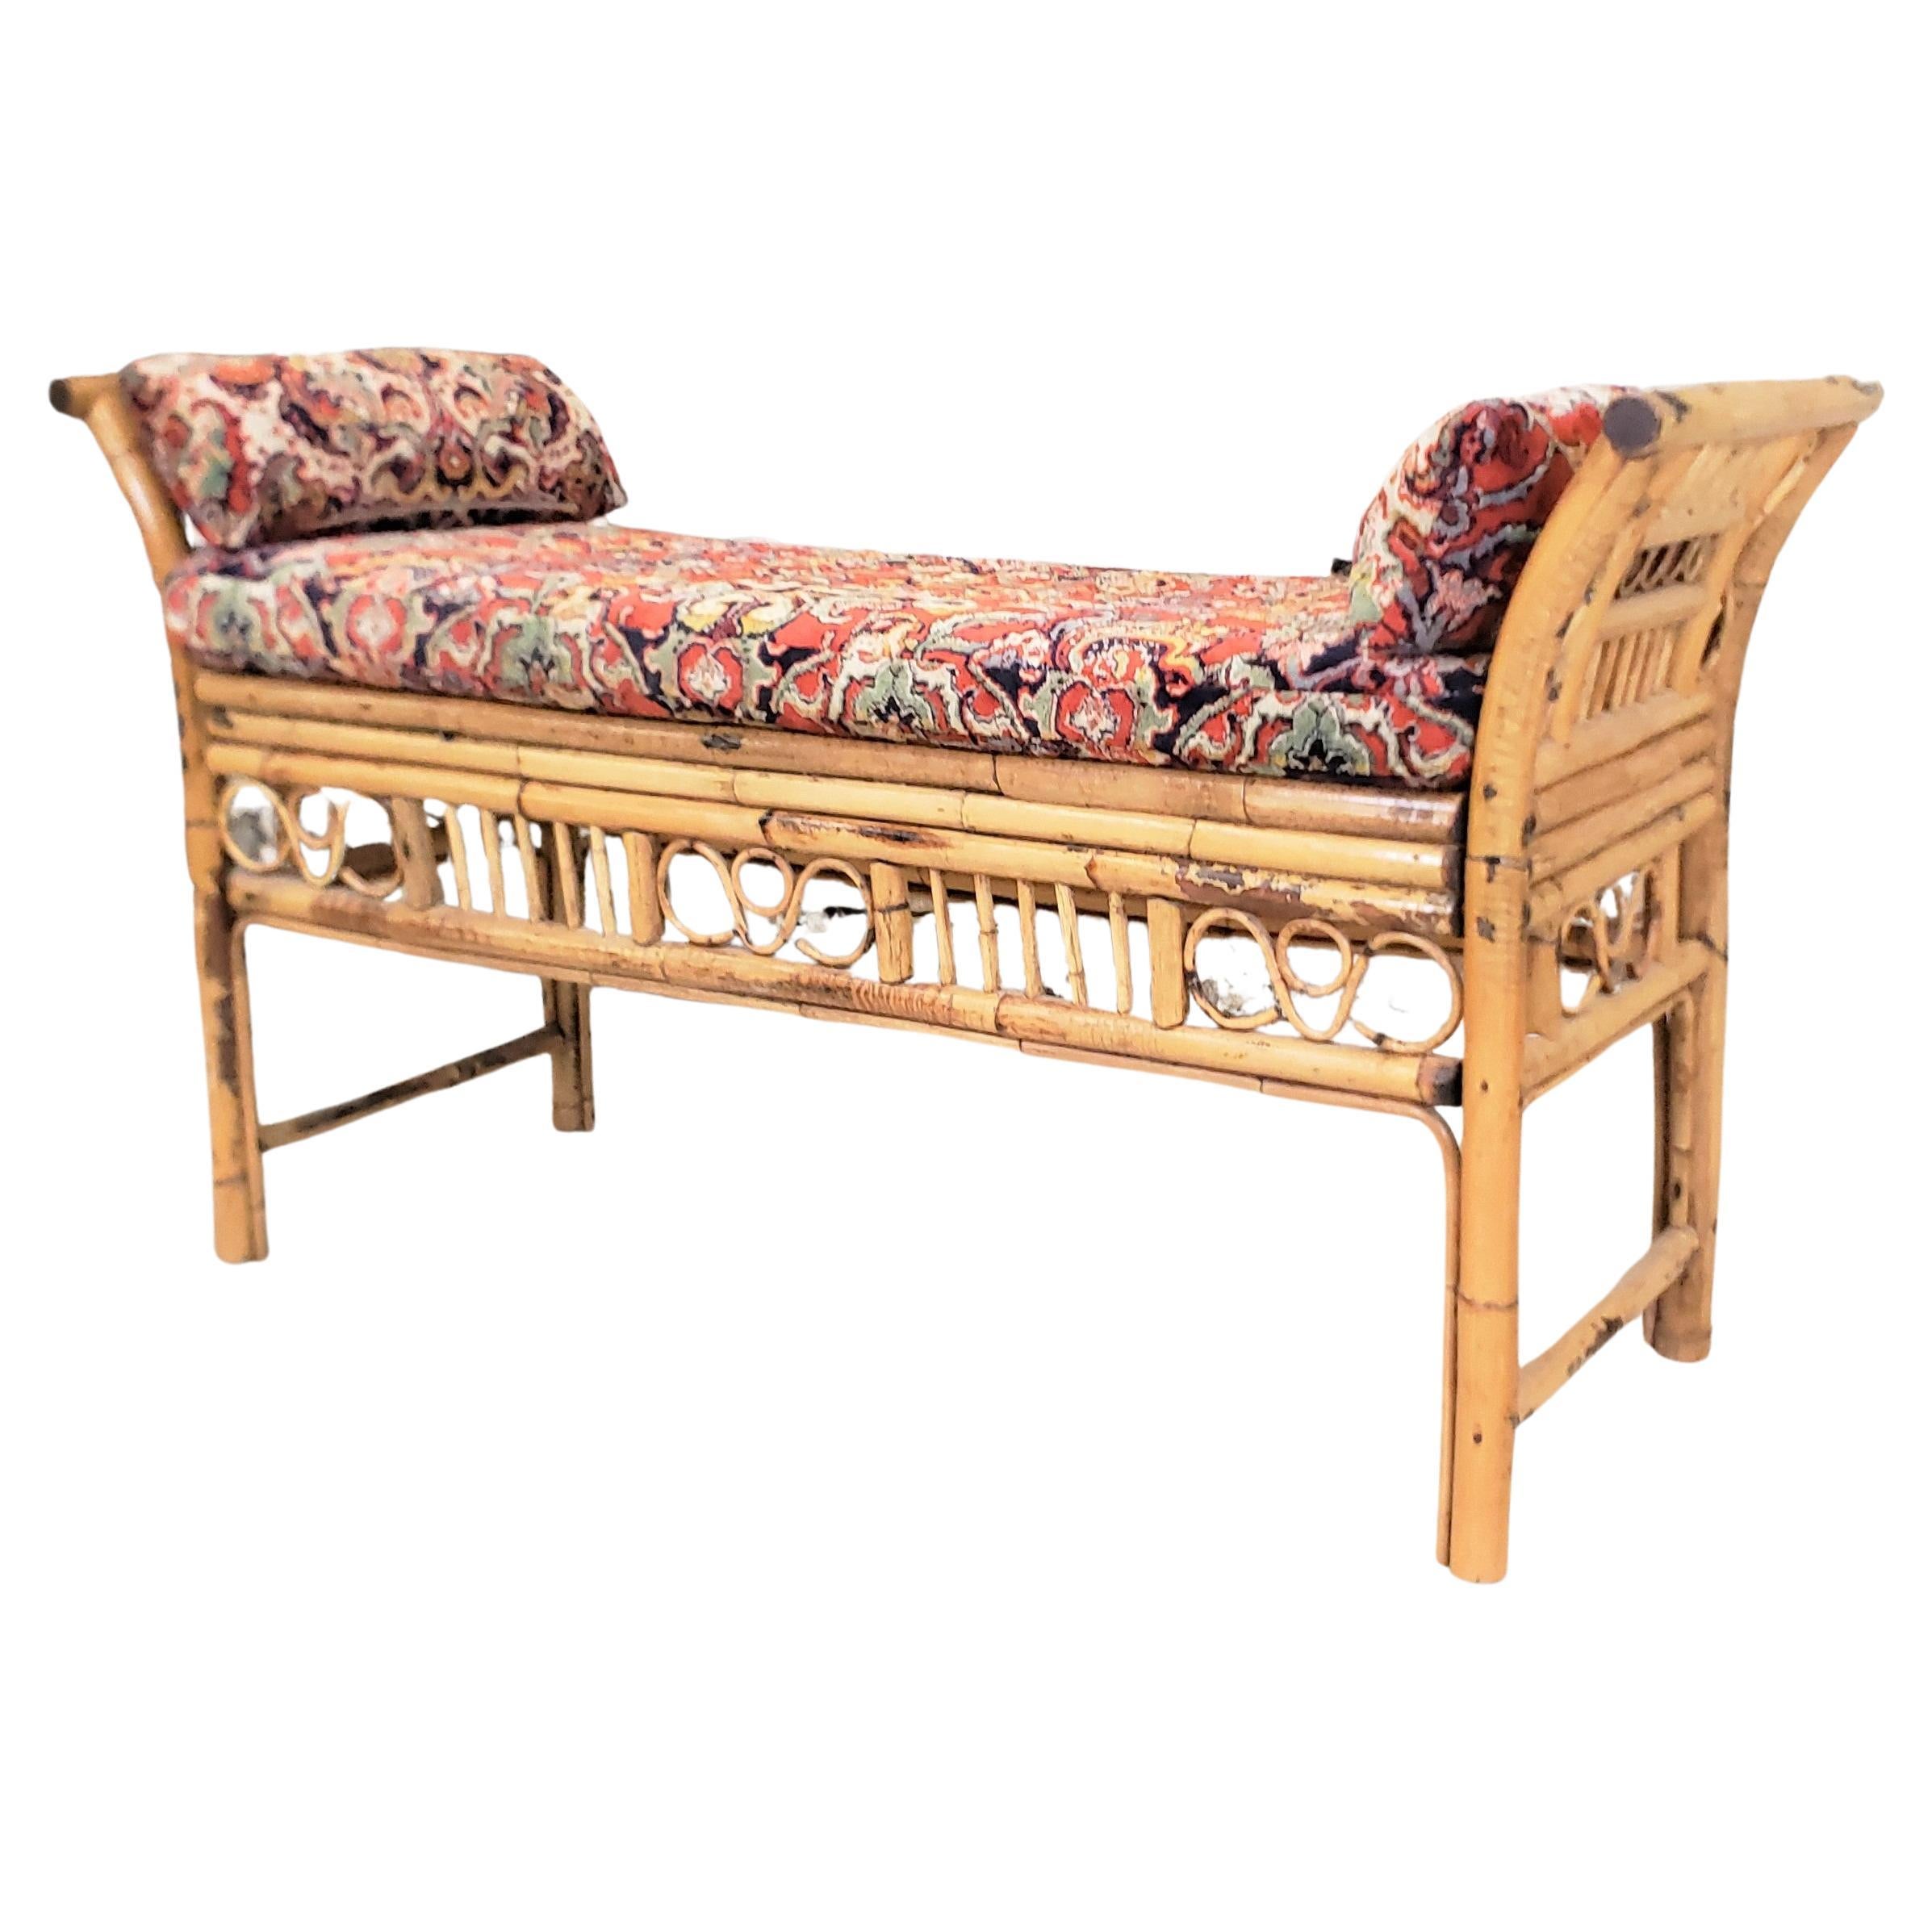 Antique Art Deco Rattan Bohemian Styled Bench with Cushion & Bolsters For Sale